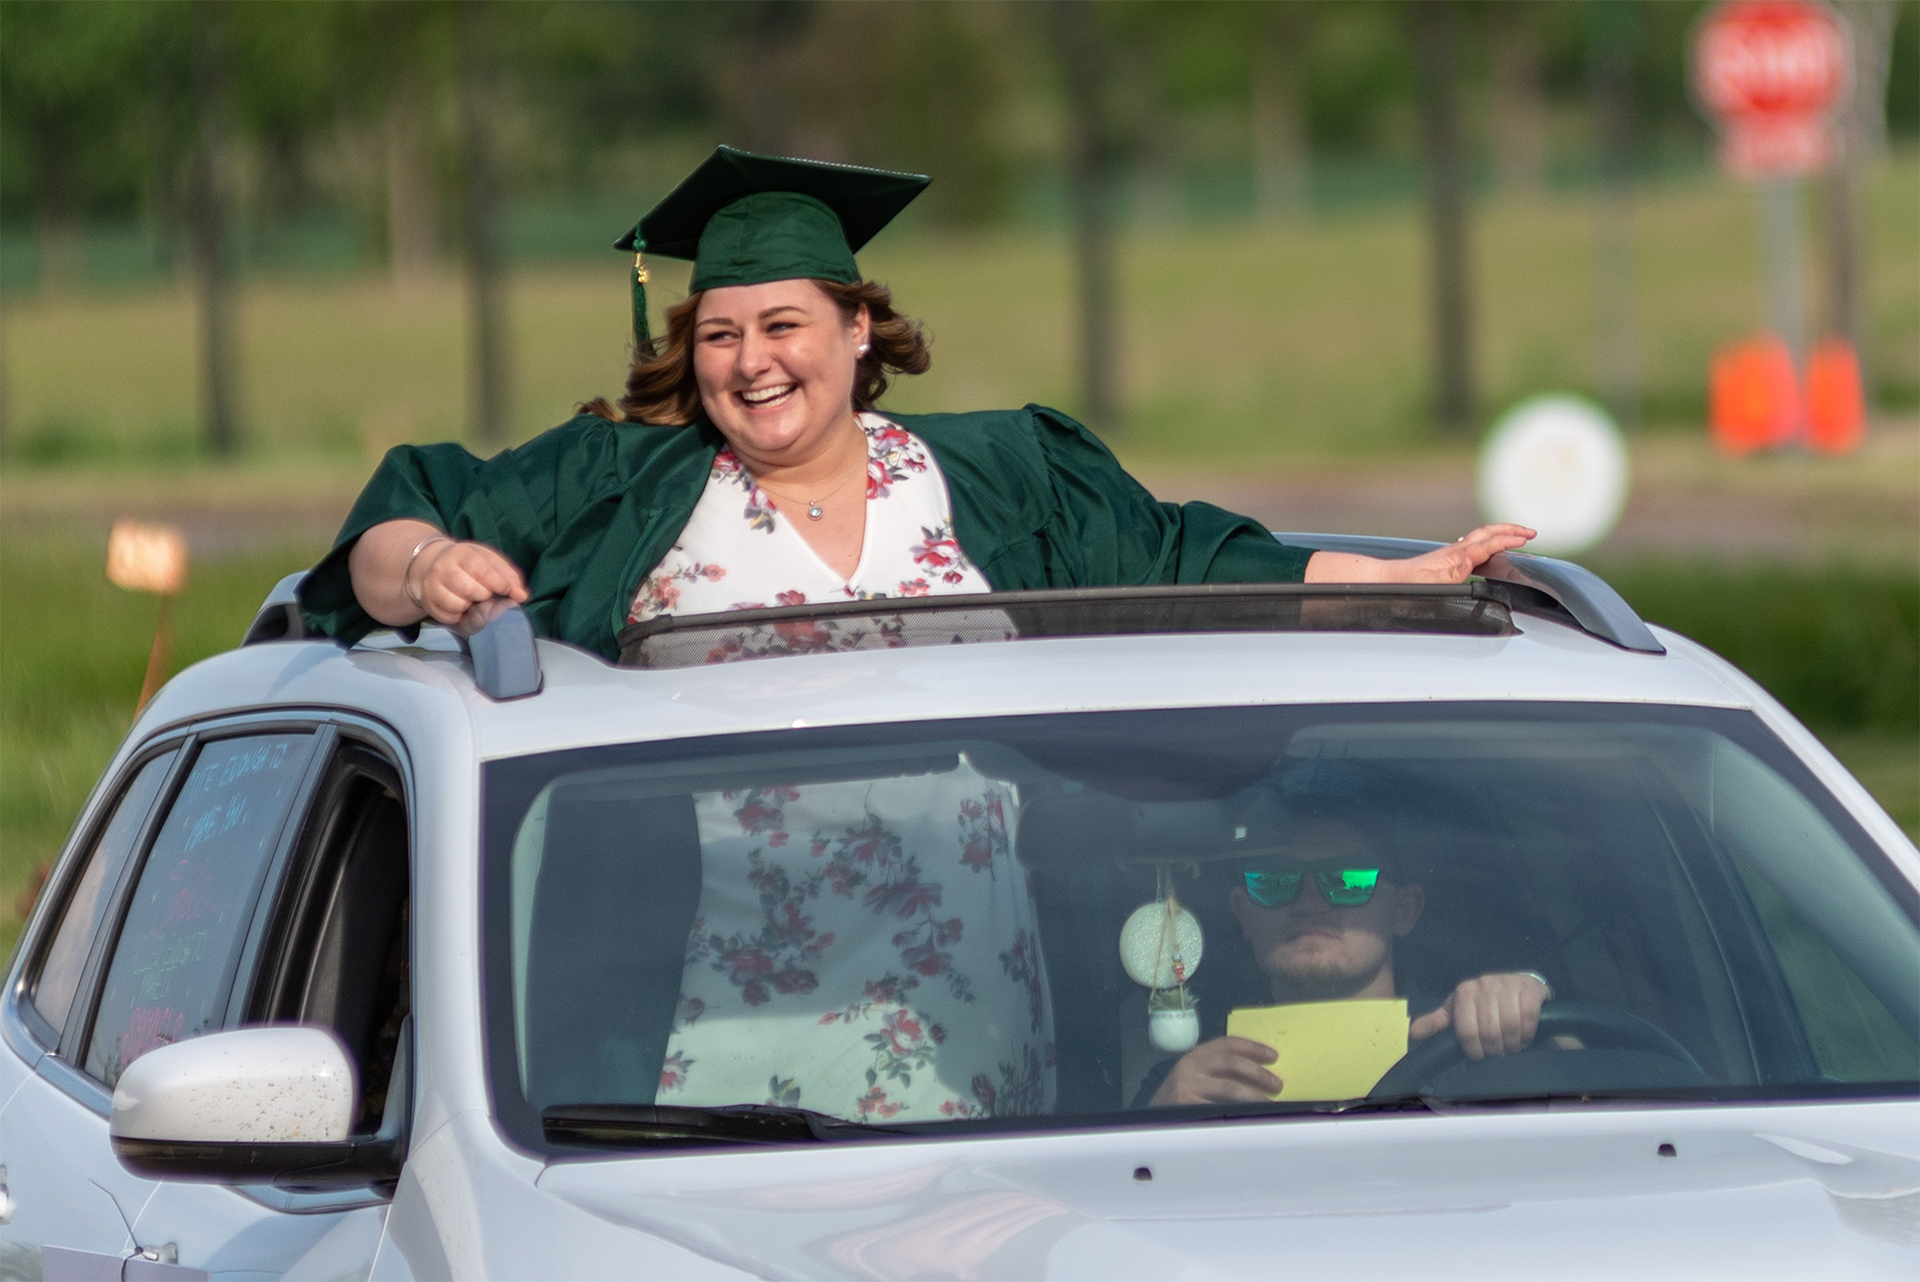 Student in car at Cruise-in Commencement